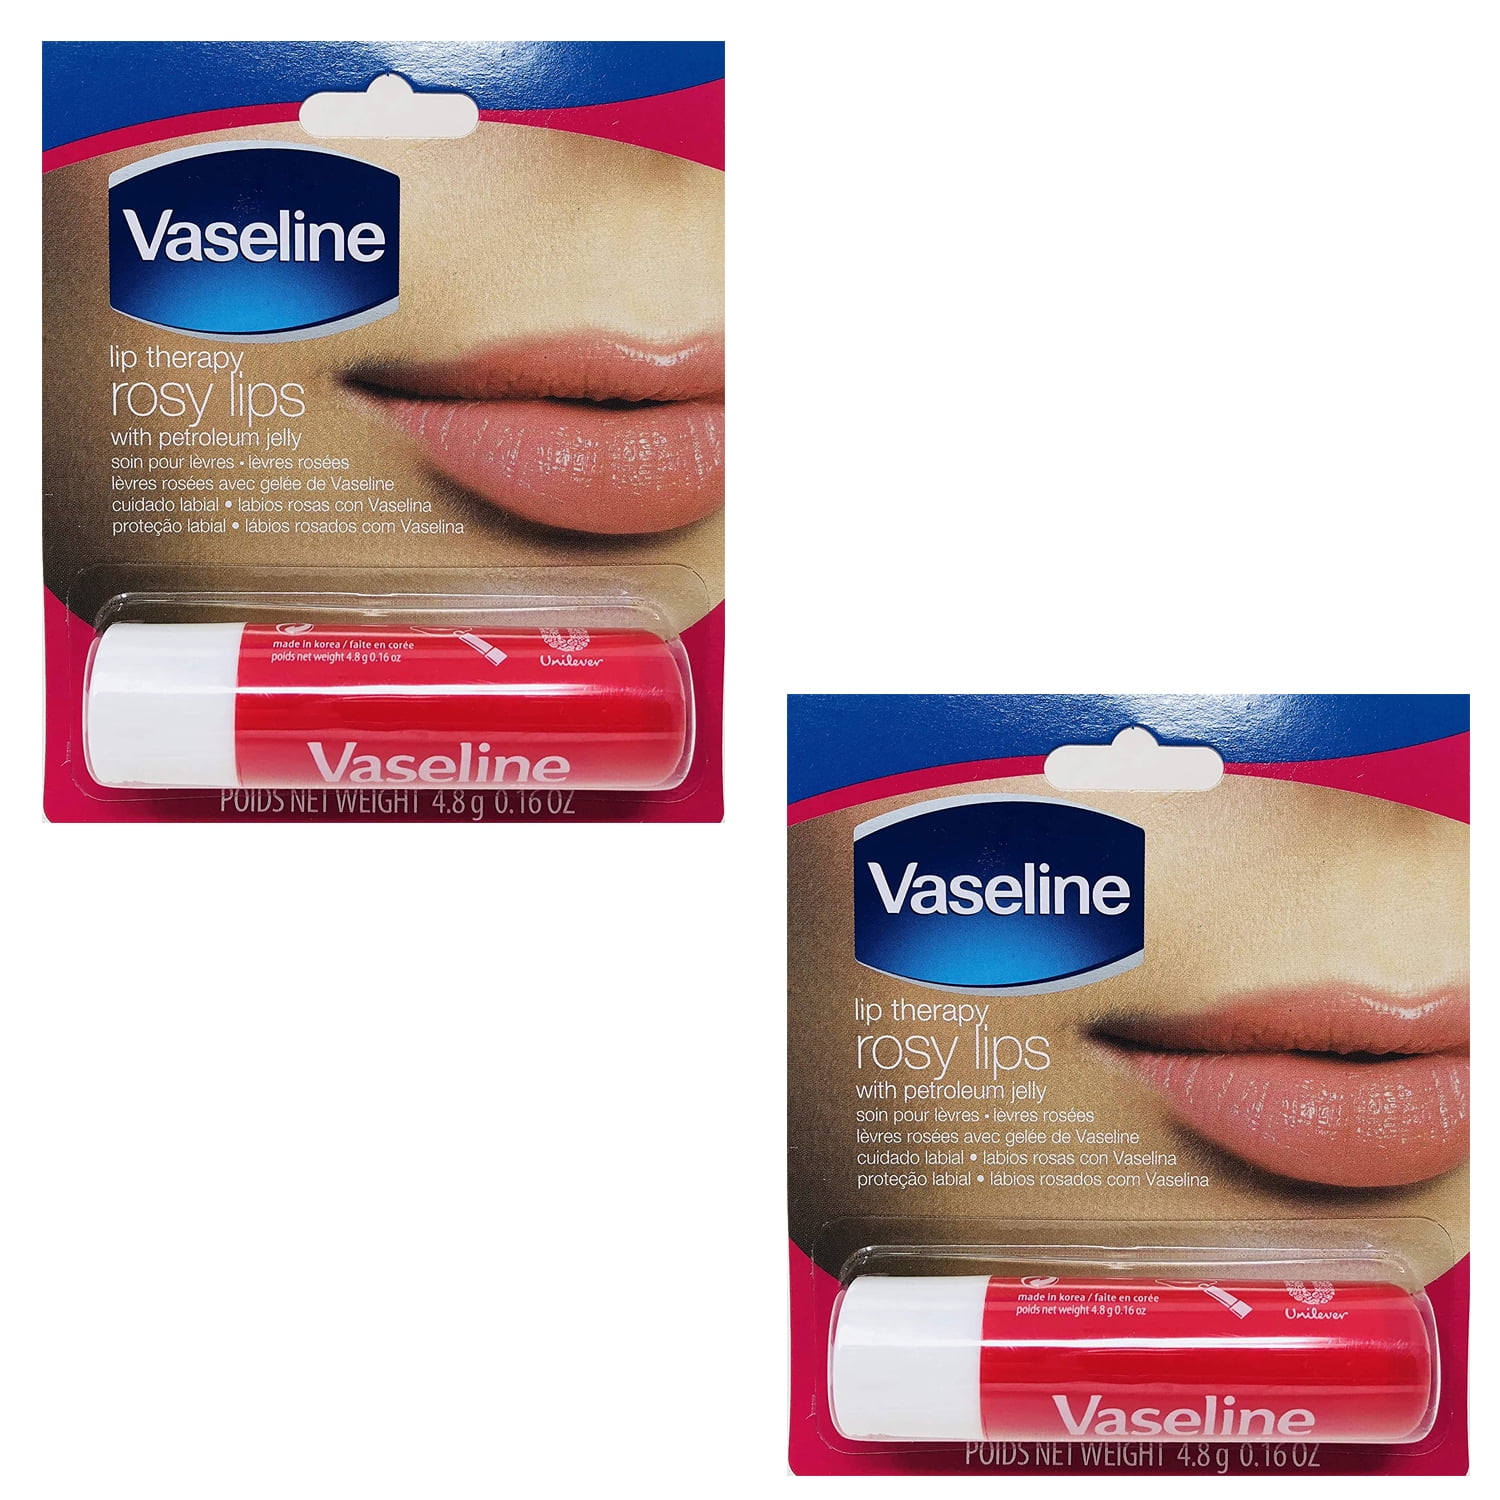 fløde utilfredsstillende Se internettet 2 Pack) Vaseline Lip Therapy Rosy Lips | Lip Balm with Petroleum Jelly for  Providing Your Lips with Ultimate Hydration and Essential Moisture to Treat  Chapped, Dry, Peeling, or Cracked Lips; 0.16